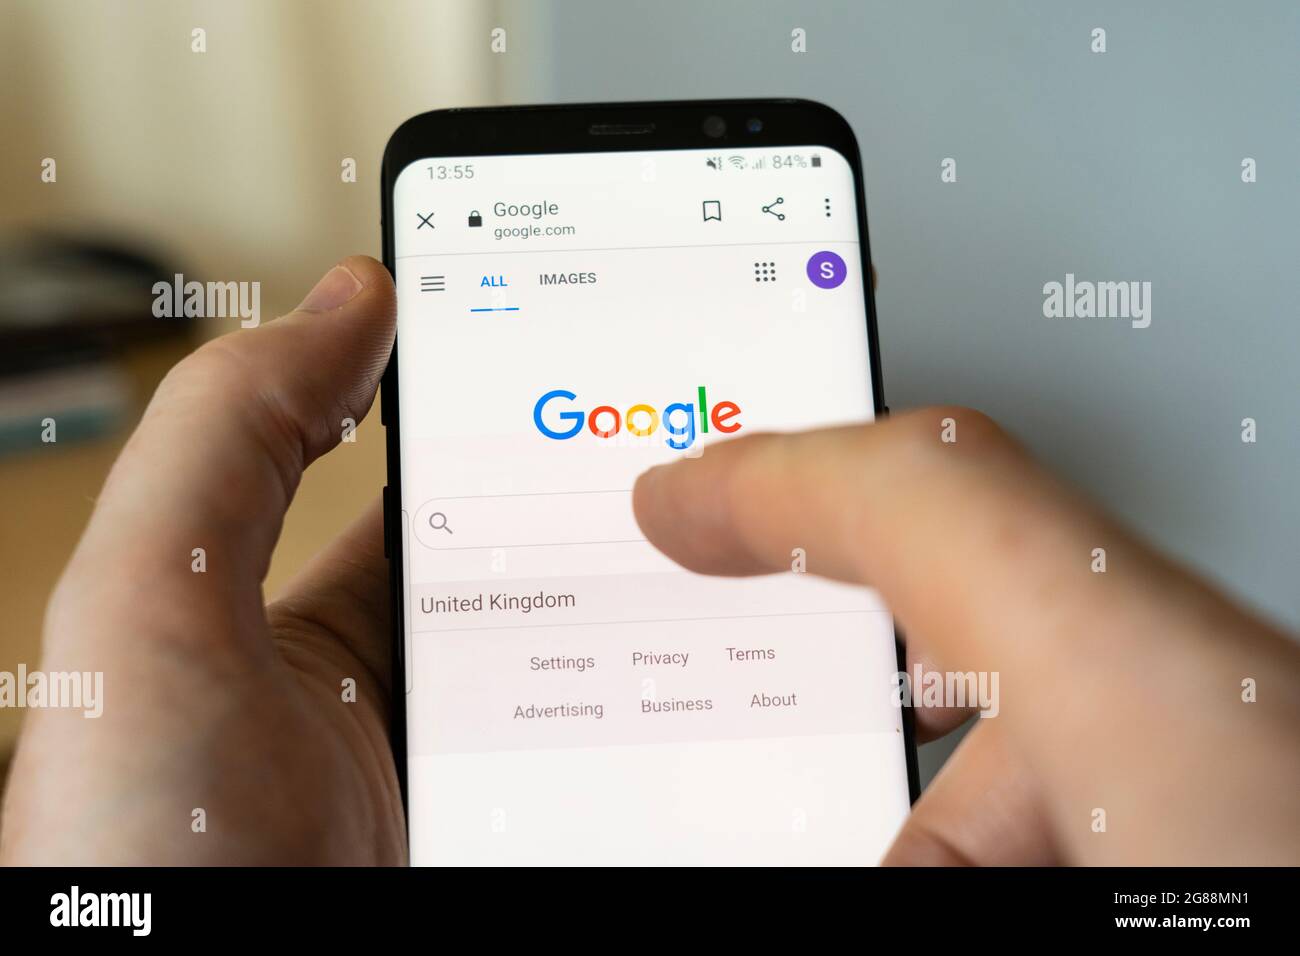 A man's hand holding an Android smartphone at home and selecting the Google Search bar on the google.com search engine homepage Stock Photo